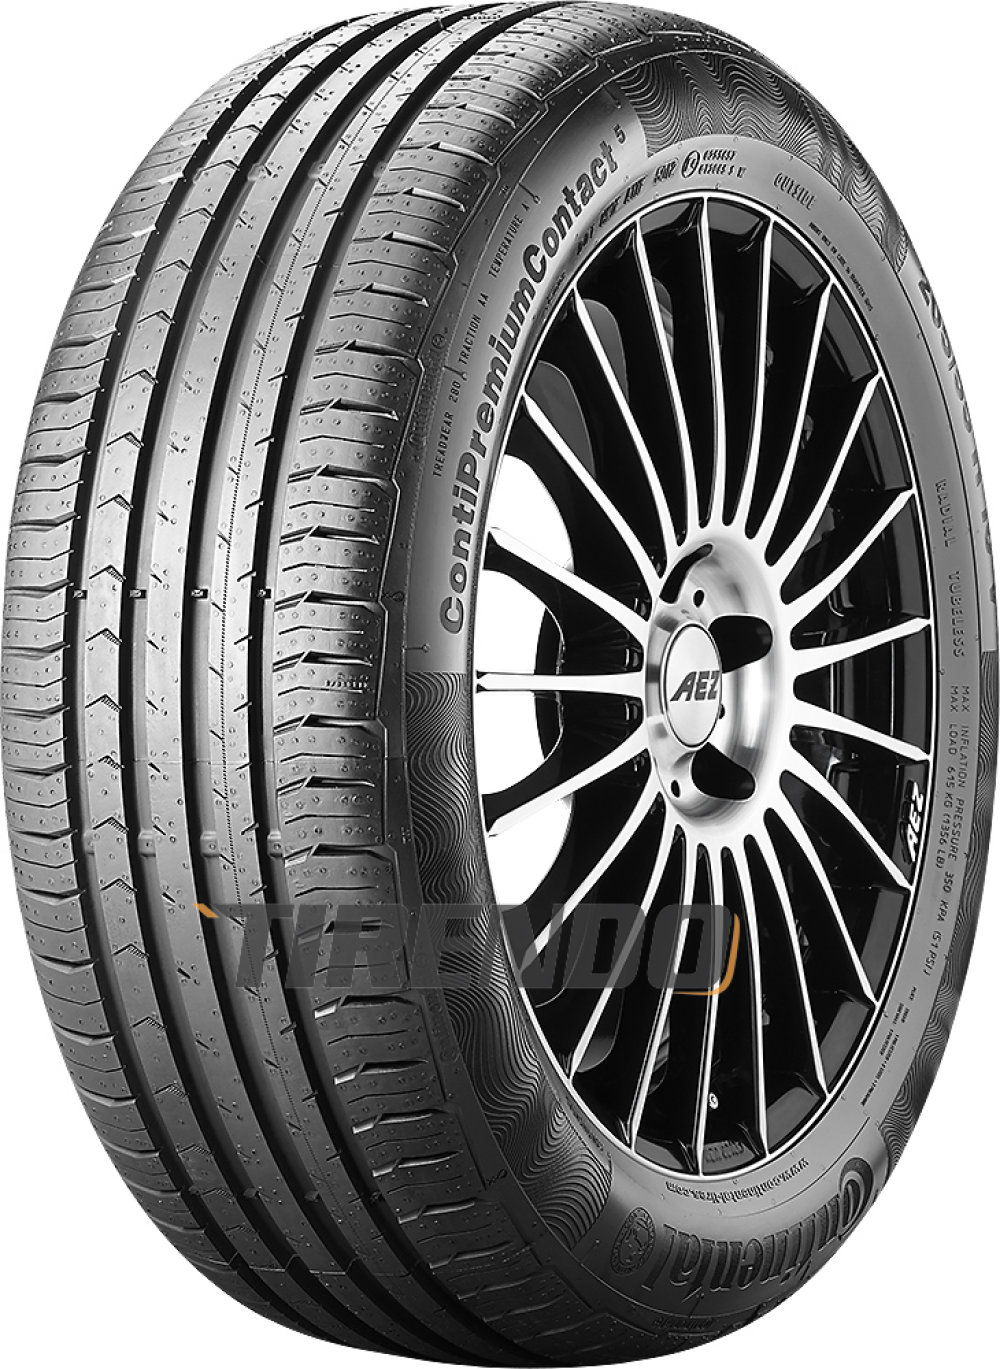 Image of Continental ContiPremiumContact 5 ( 215/65 R16 98H )